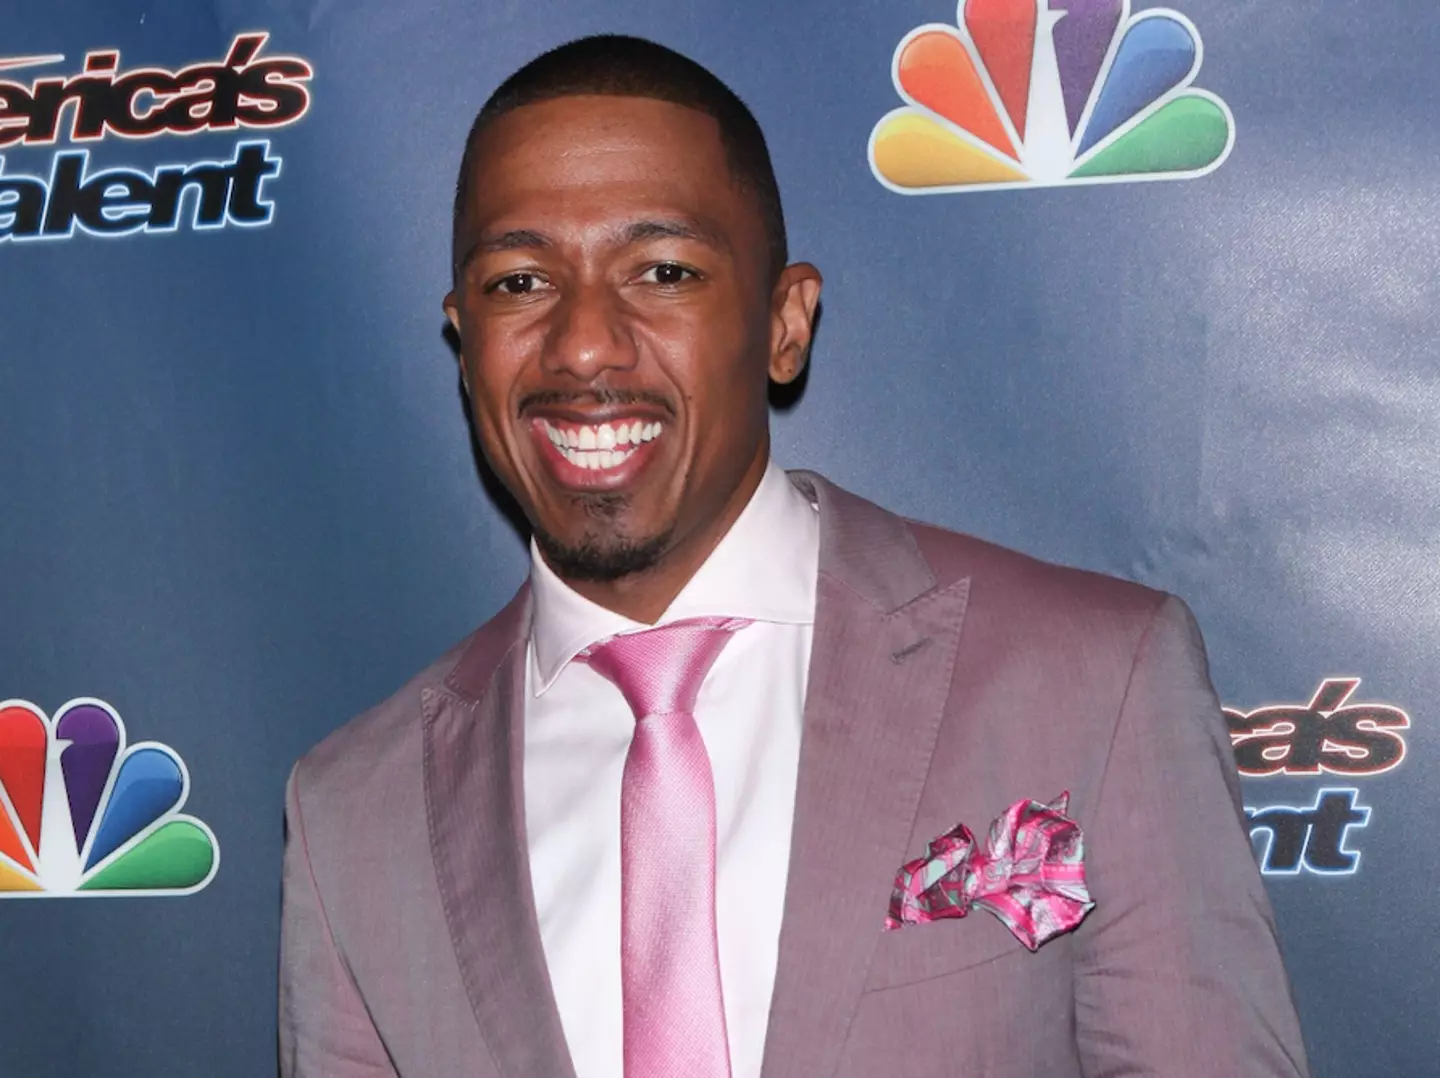 Nick Cannon is soon set to welcome his eighth child.